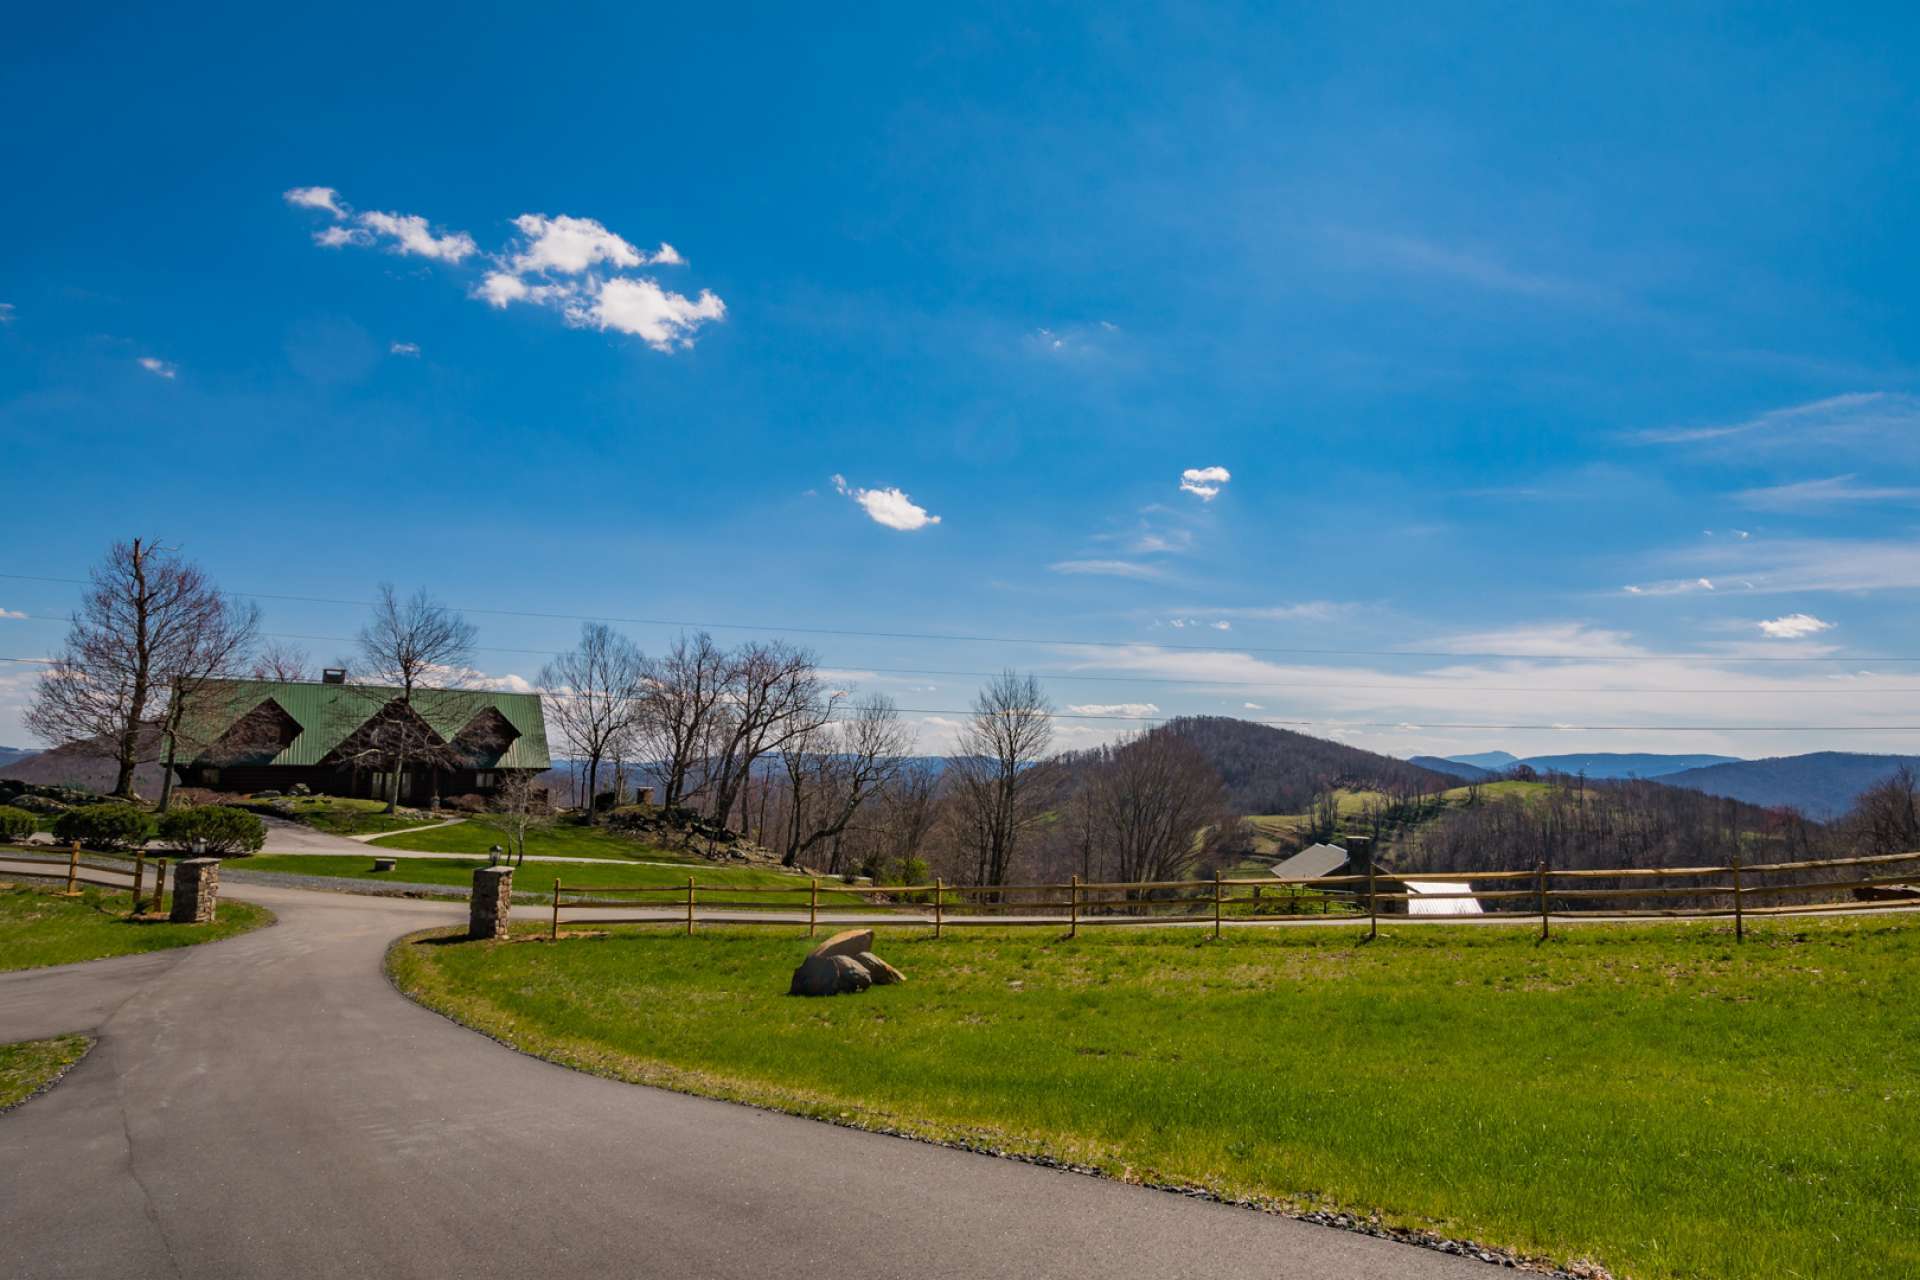 Conveniently located off of Majestic View Lane in the Todd area of Southern Ashe County, between Boone and West Jefferson, this home offers easy year round access.